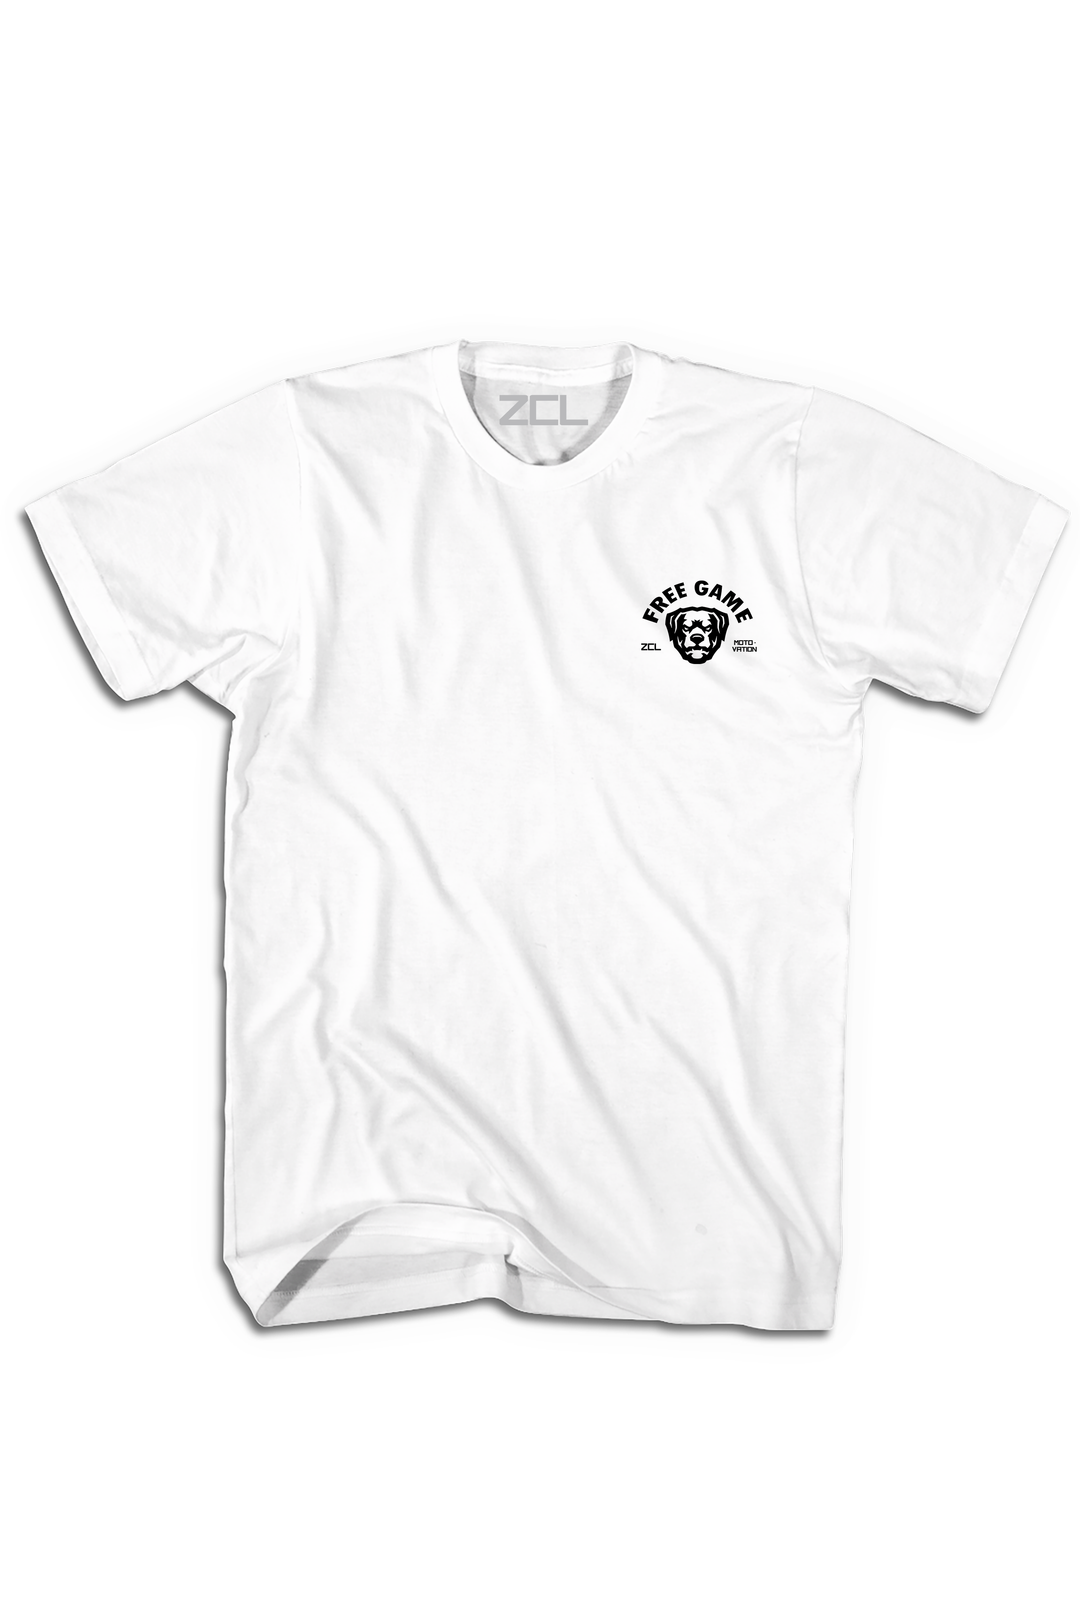 Embroidered ZCL Free Game Logo Tee White - Zamage